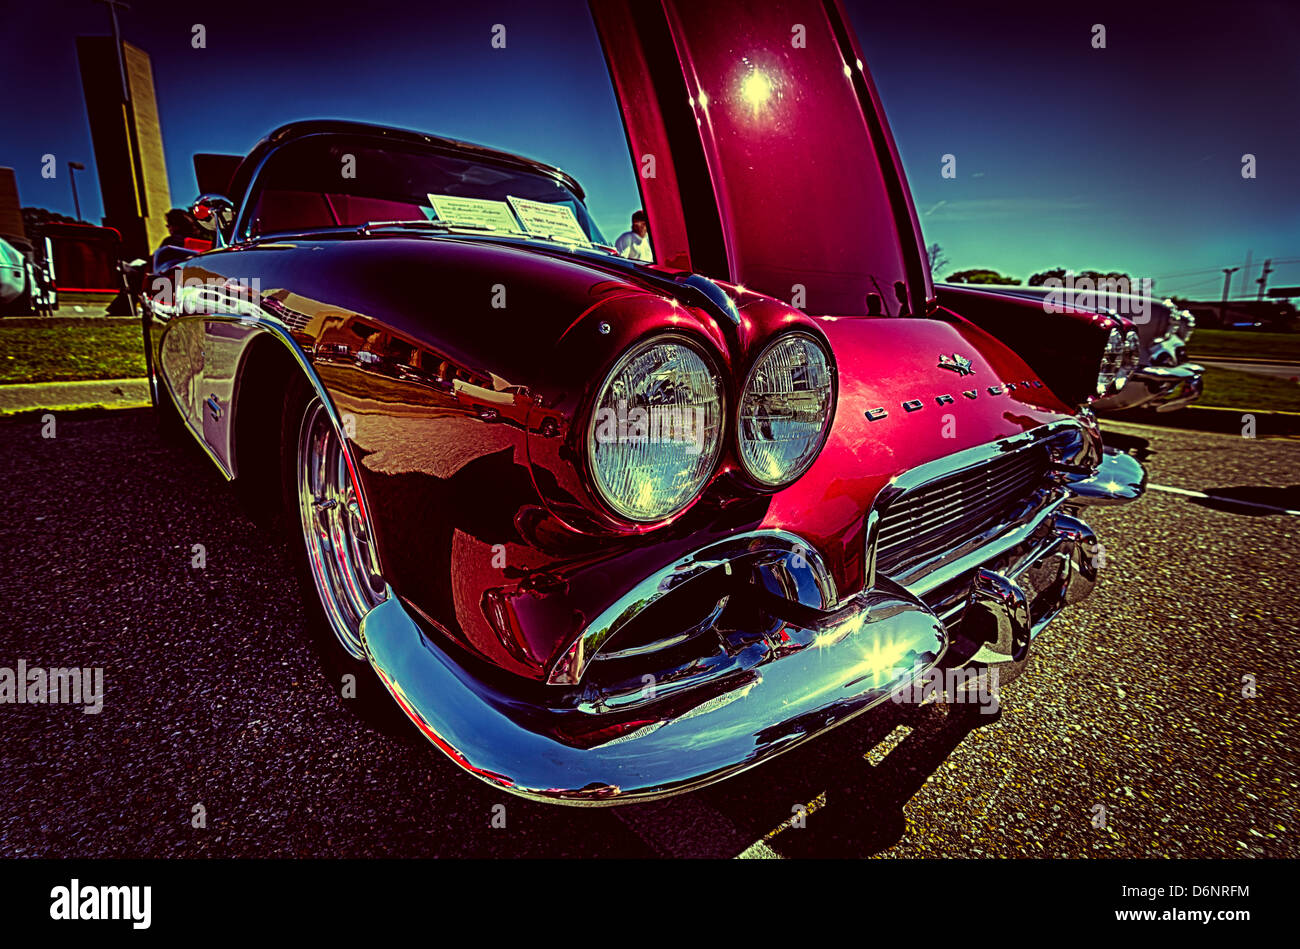 Closeup of red vintage Chevy Corvette at car show. Stock Photo